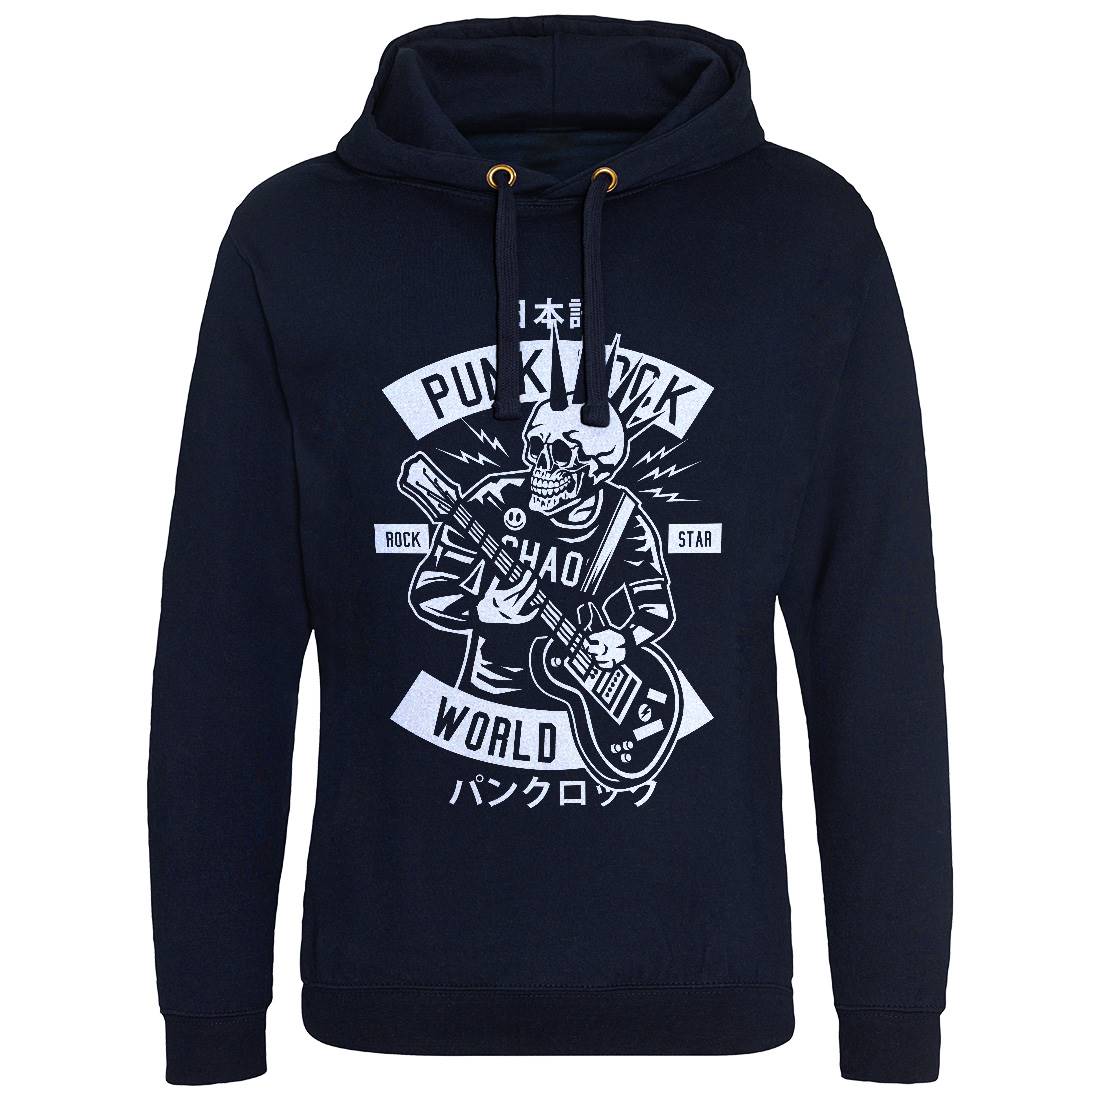 Punk Rock Show Mens Hoodie Without Pocket Music B606